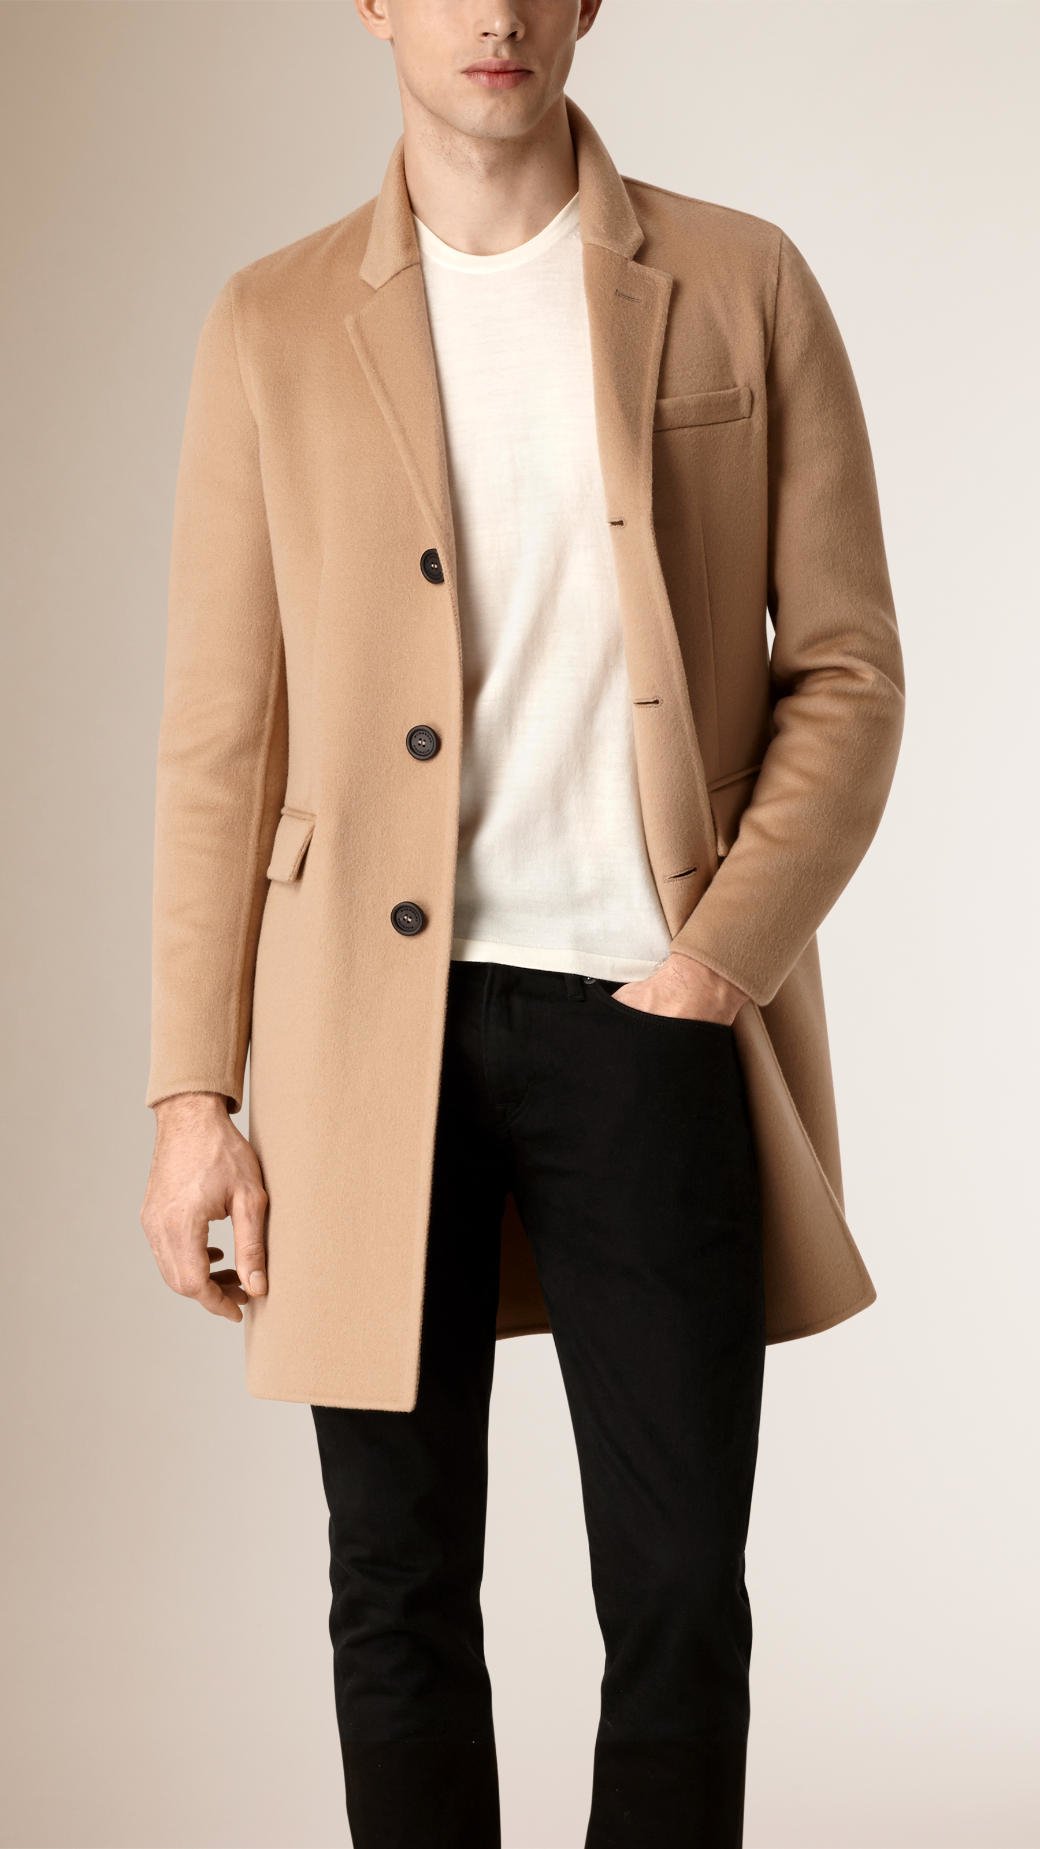 Lyst - Burberry Tailored Cashmere Coat in Natural for Men